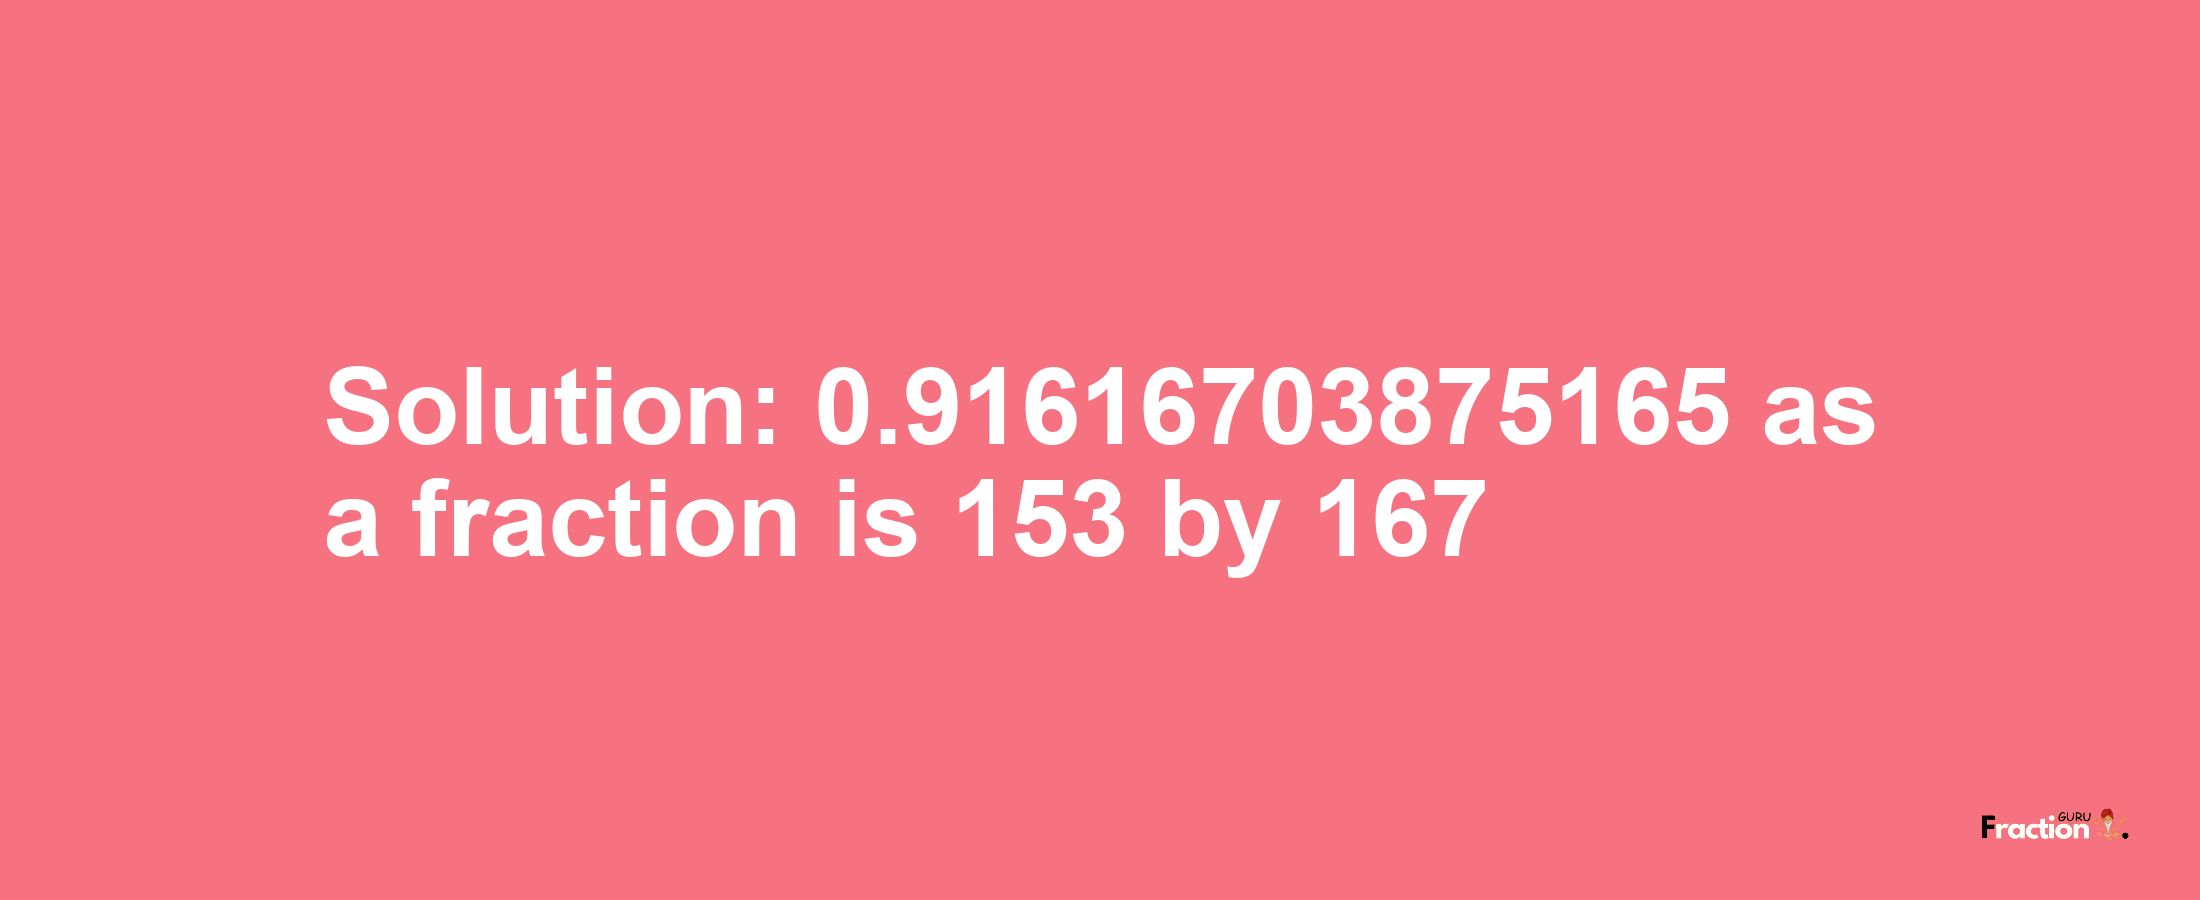 Solution:0.91616703875165 as a fraction is 153/167